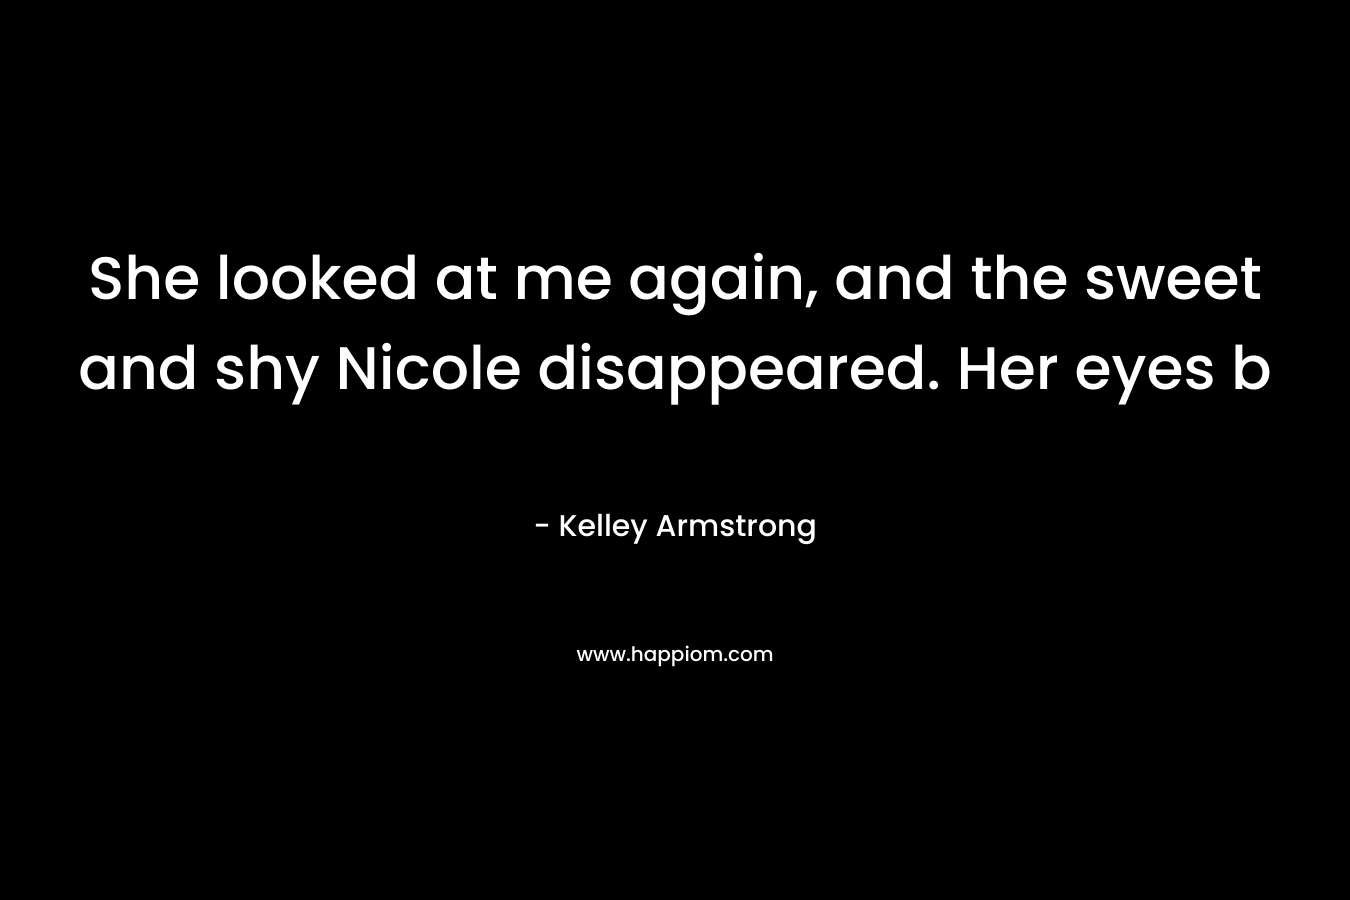 She looked at me again, and the sweet and shy Nicole disappeared. Her eyes b – Kelley Armstrong